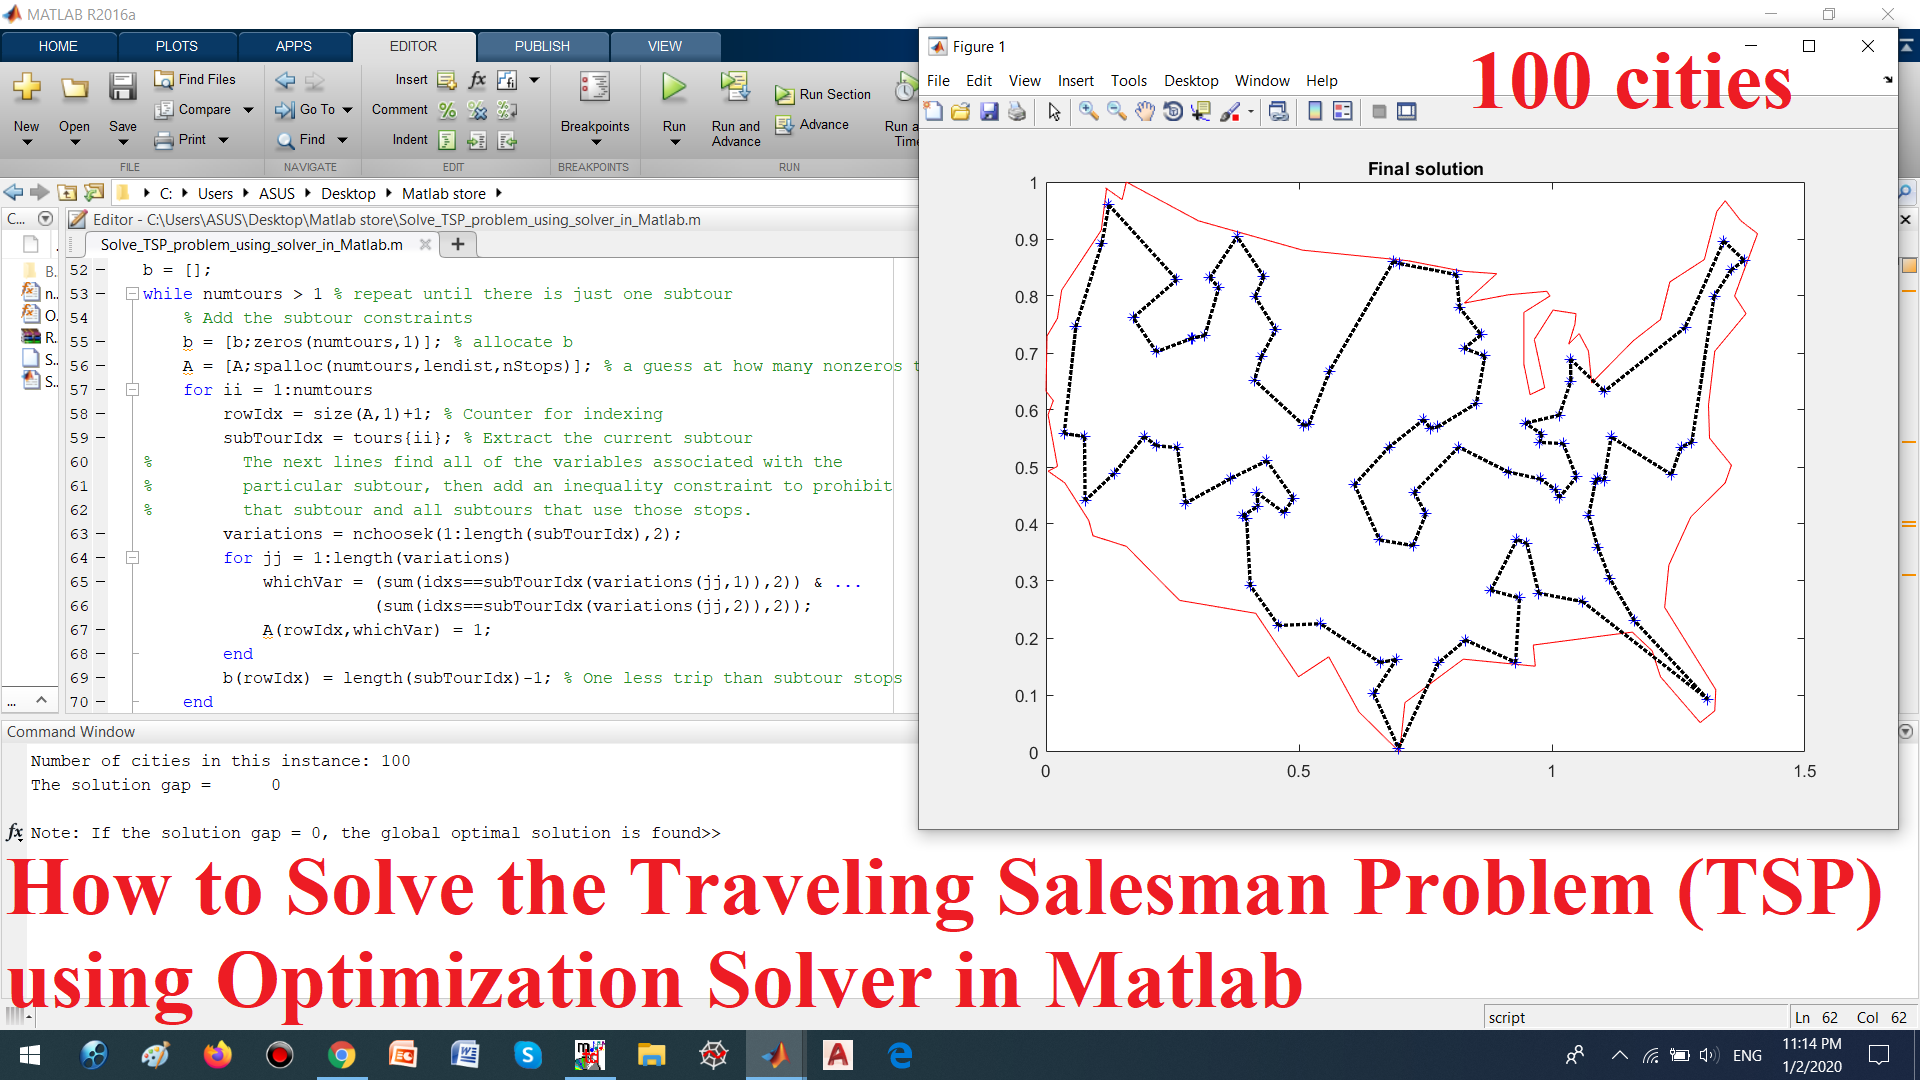 How to Solve Travelling Salesman Problem (TSP) using Optimization Solver in Matlab